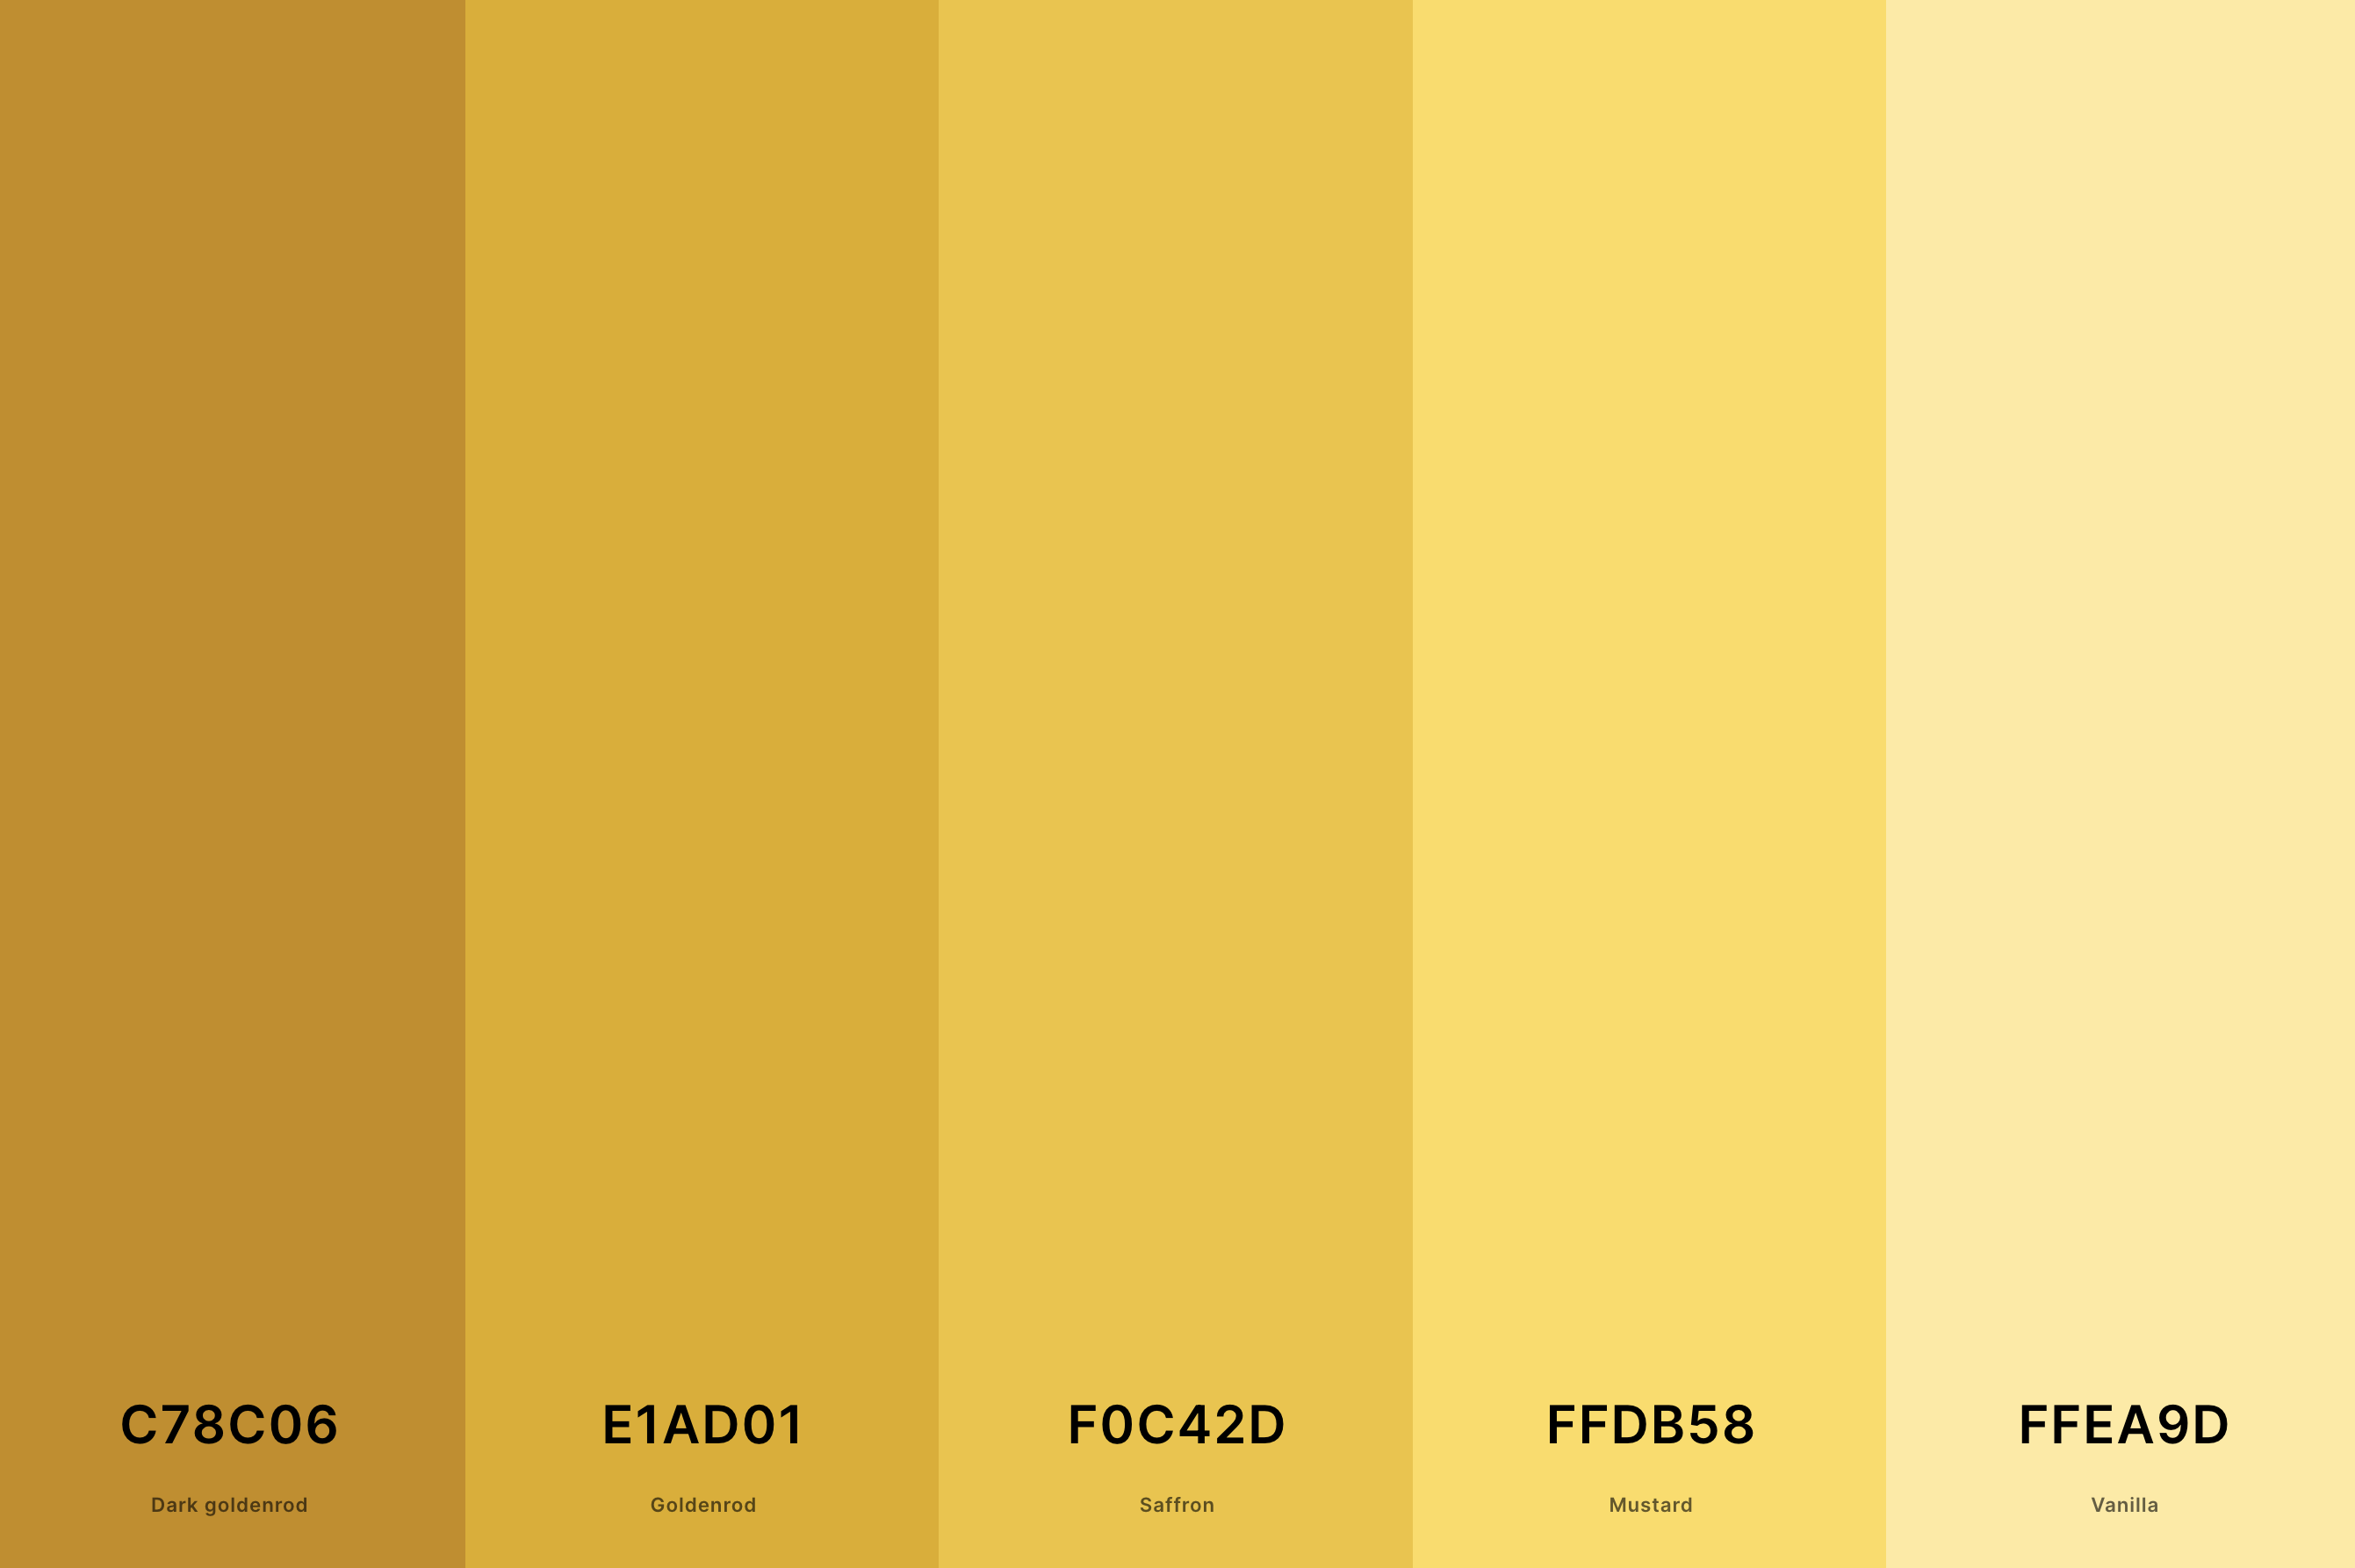 3. Mustard Yellow Color Palette Color Palette with Dark Goldenrod (Hex #C78C06) + Goldenrod (Hex #E1AD01) + Saffron (Hex #F0C42D) + Mustard (Hex #FFDB58) + Vanilla (Hex #FFEA9D) Color Palette with Hex Codes